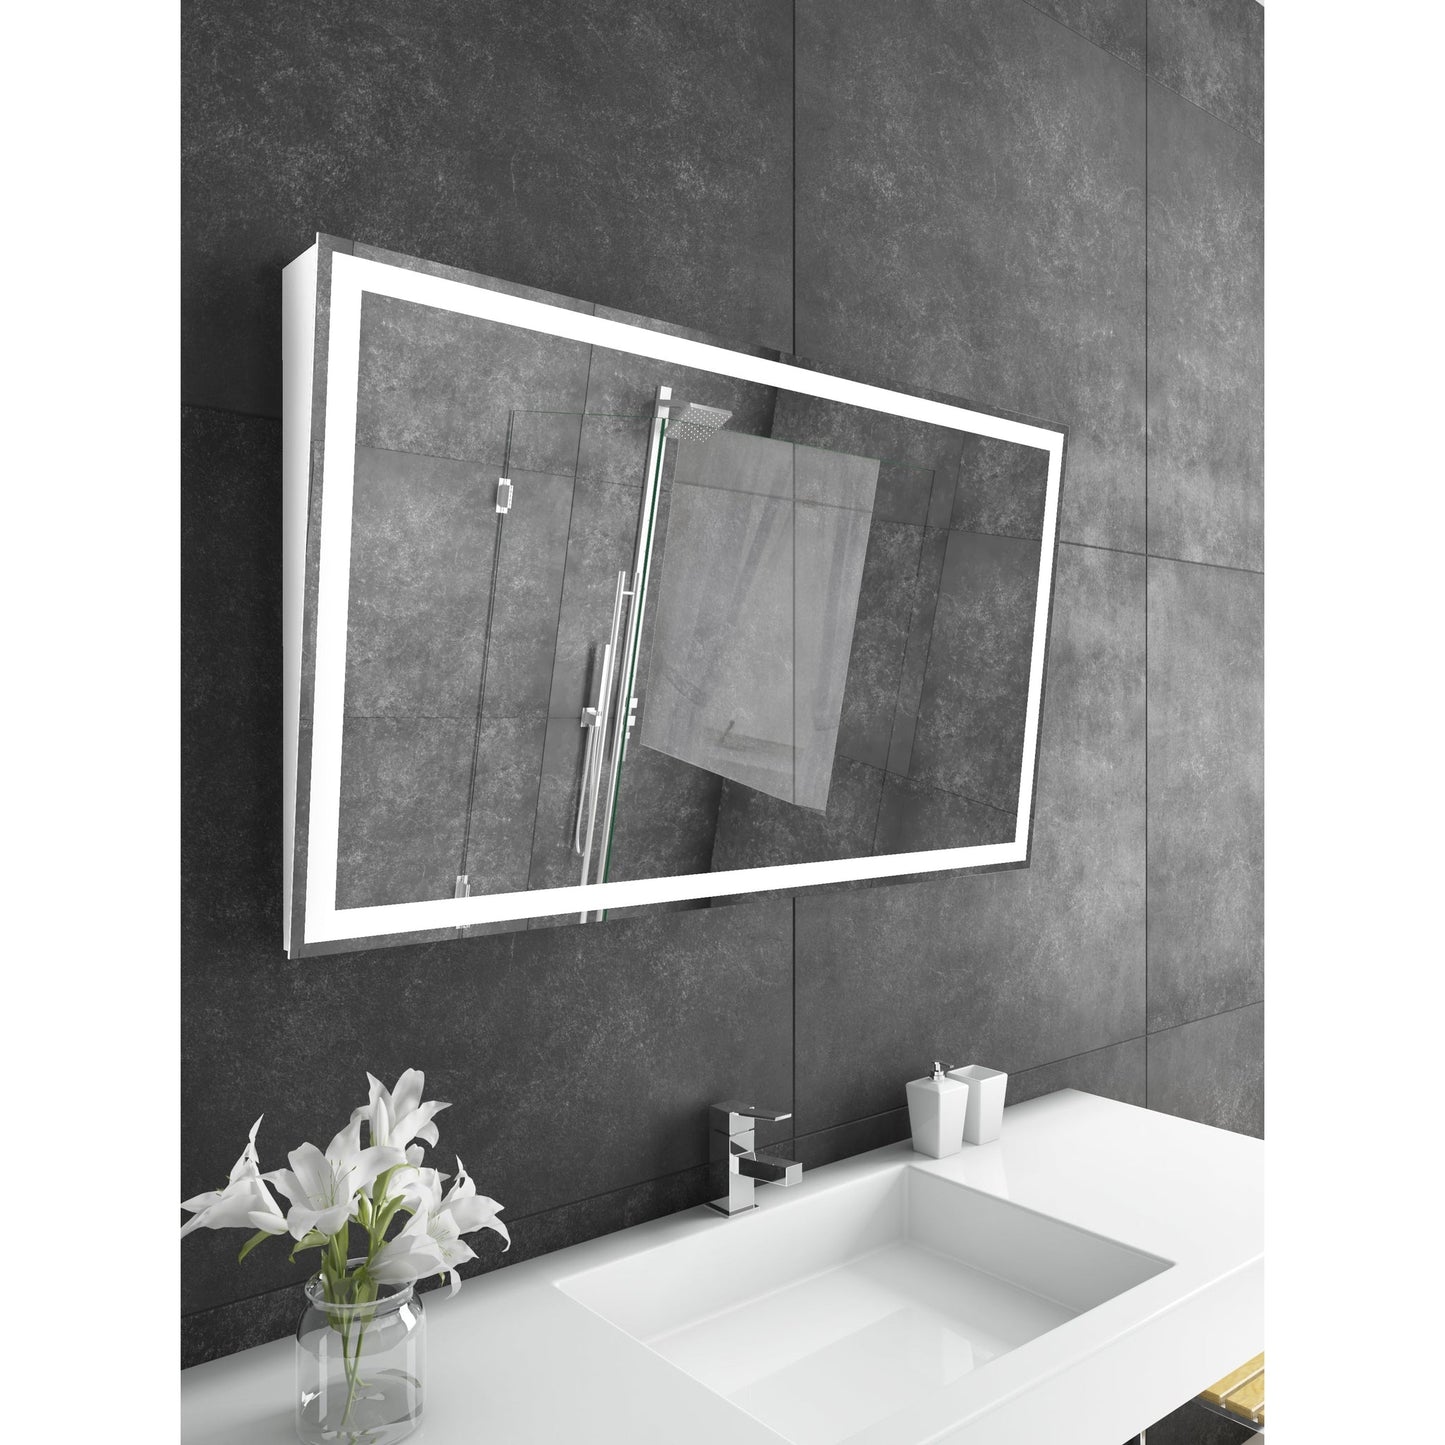 Paris Mirror Adira 48" x 28" White Front-Lit Lighted Super Bright Dimmable Wall-Mounted 6000K LED Mirror With Tilted Top Frame